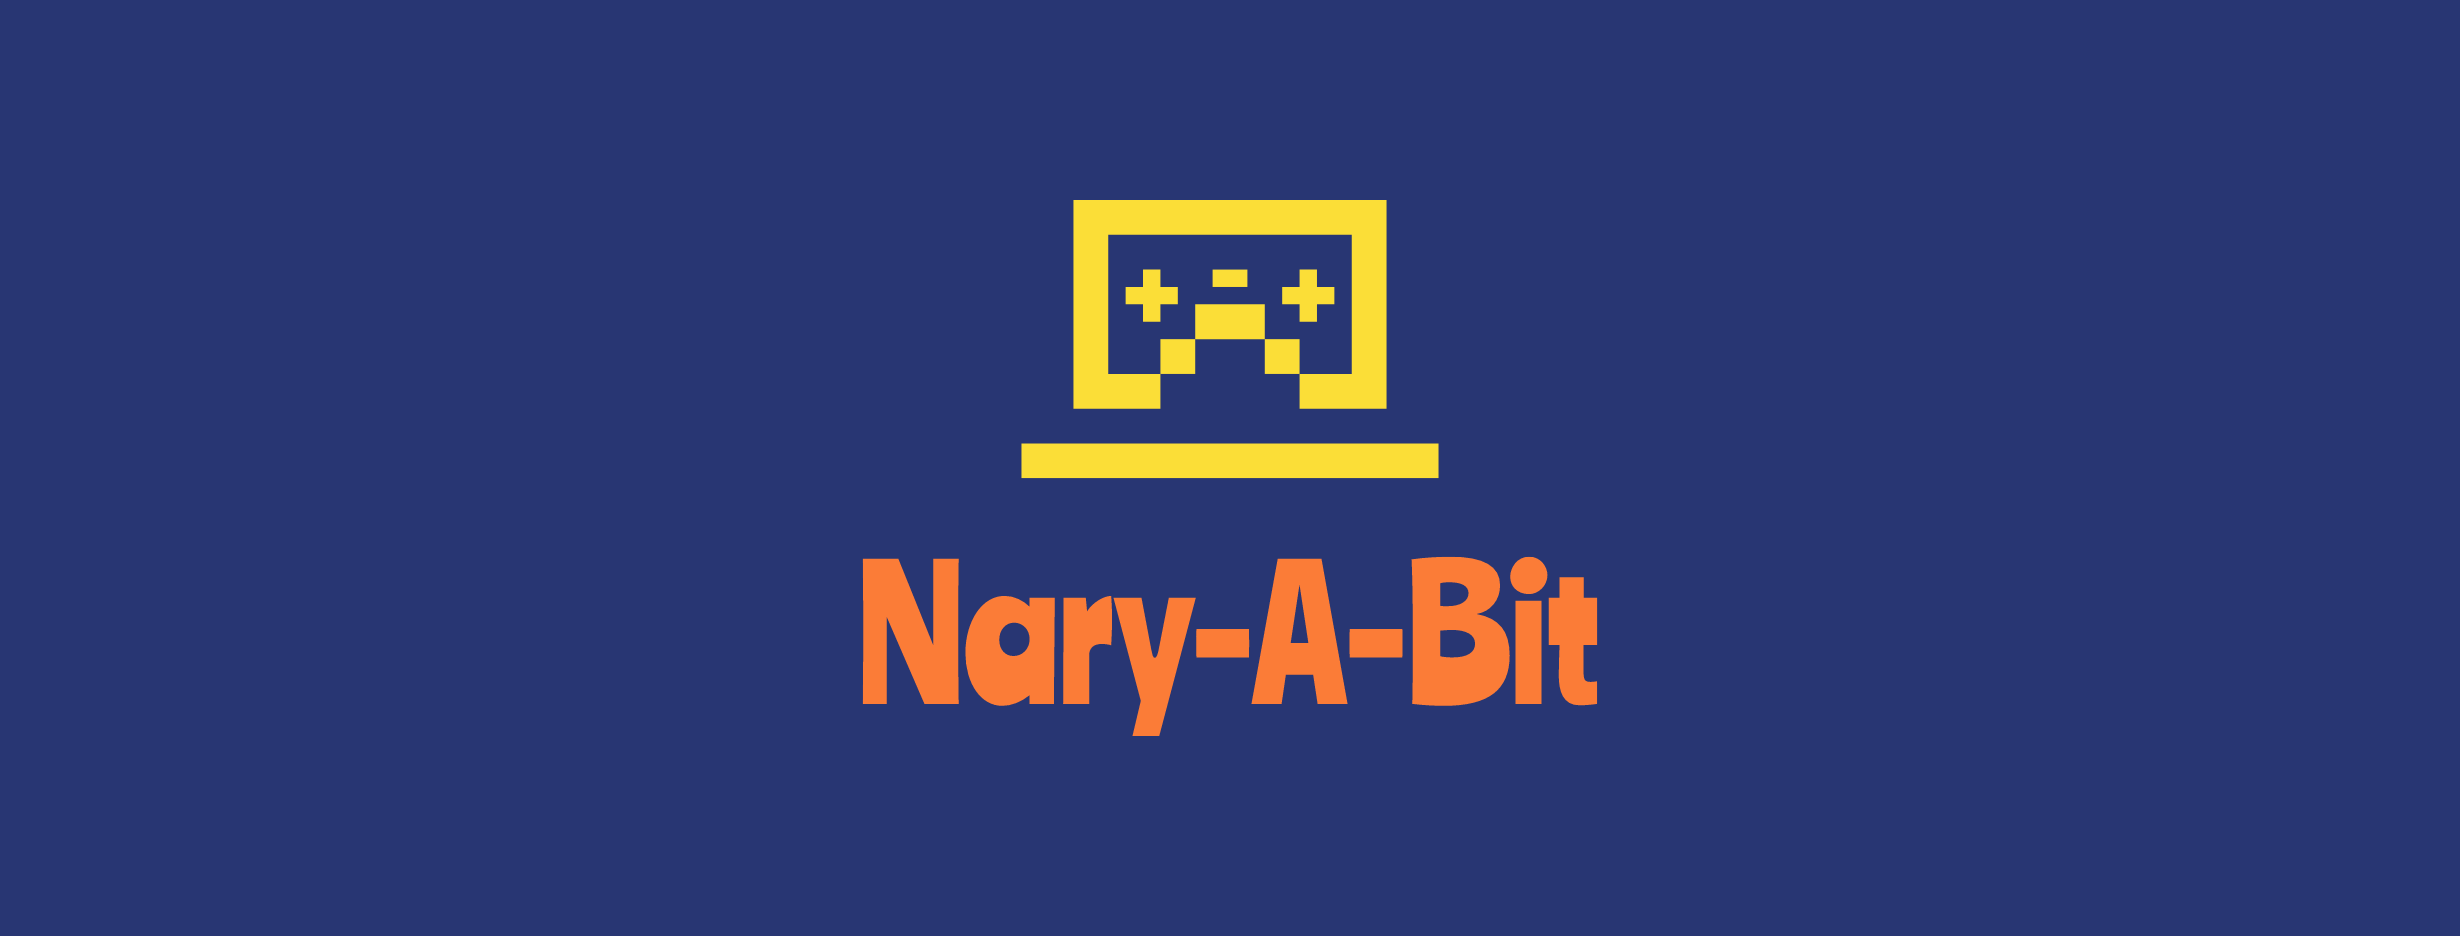 Nary-A-Bit's Text Based Game Template